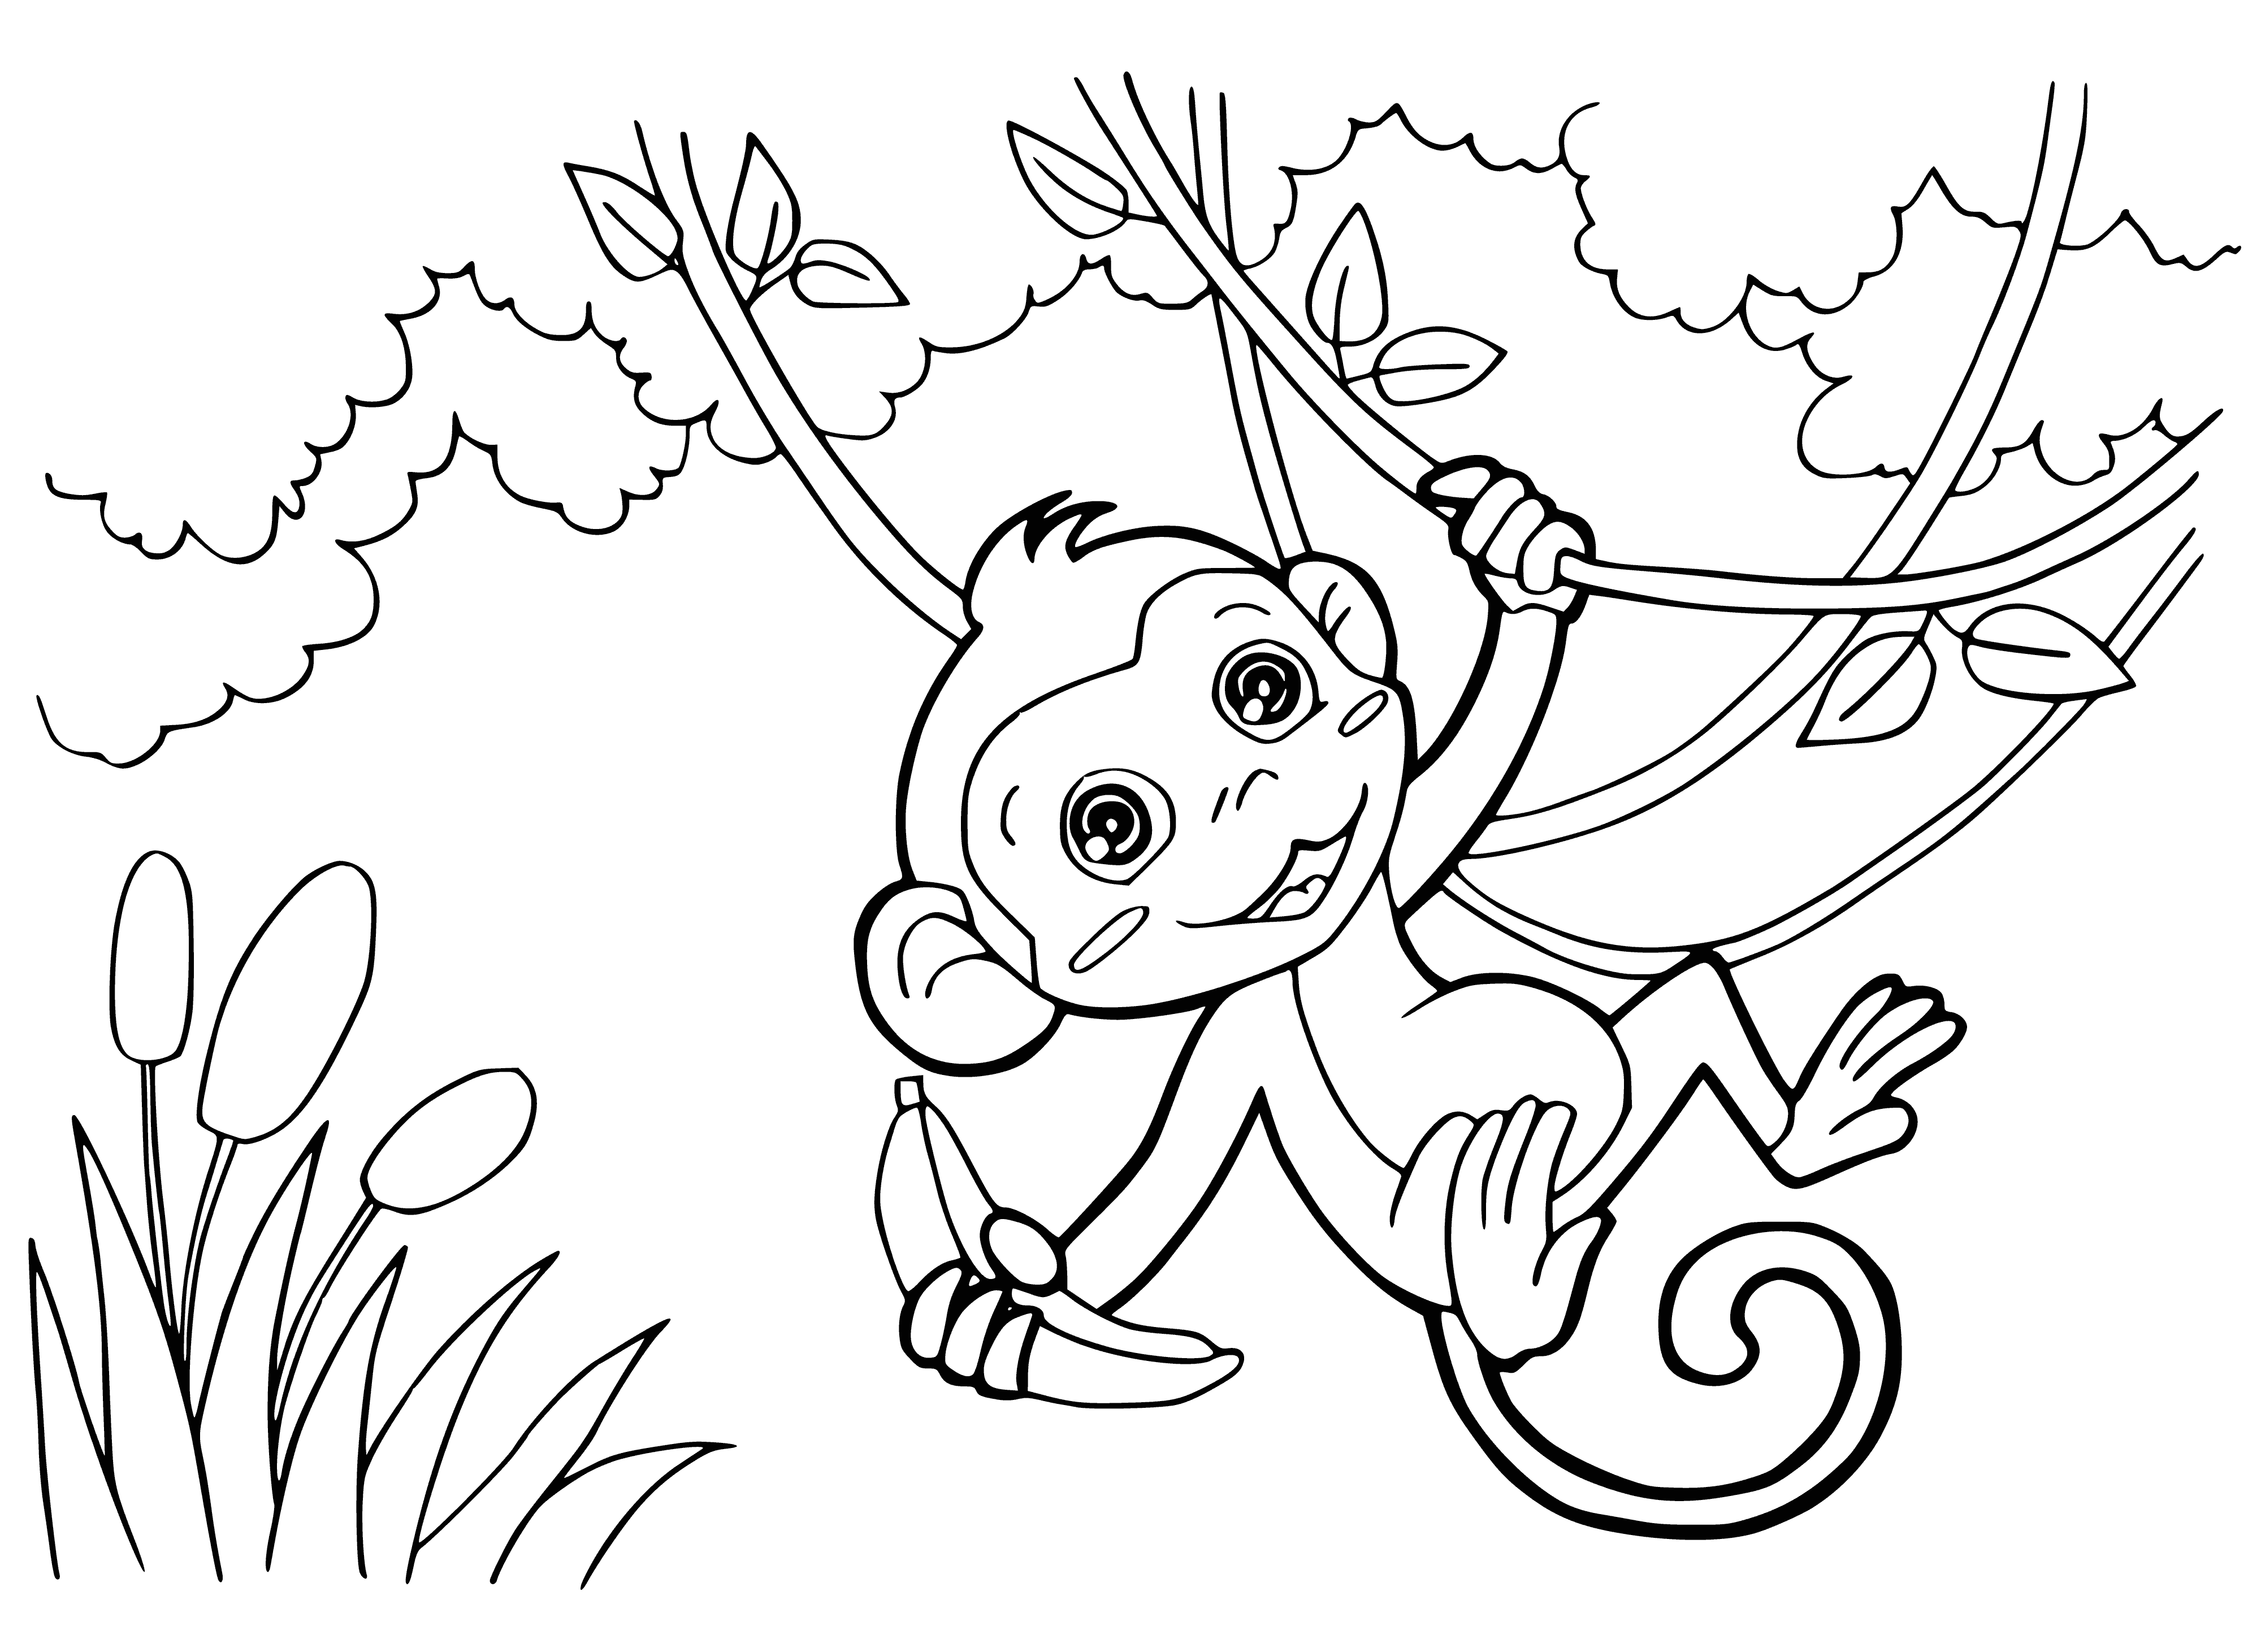 coloring page: A monkey sits sadly atop a large rock, arms wrapped around knees.